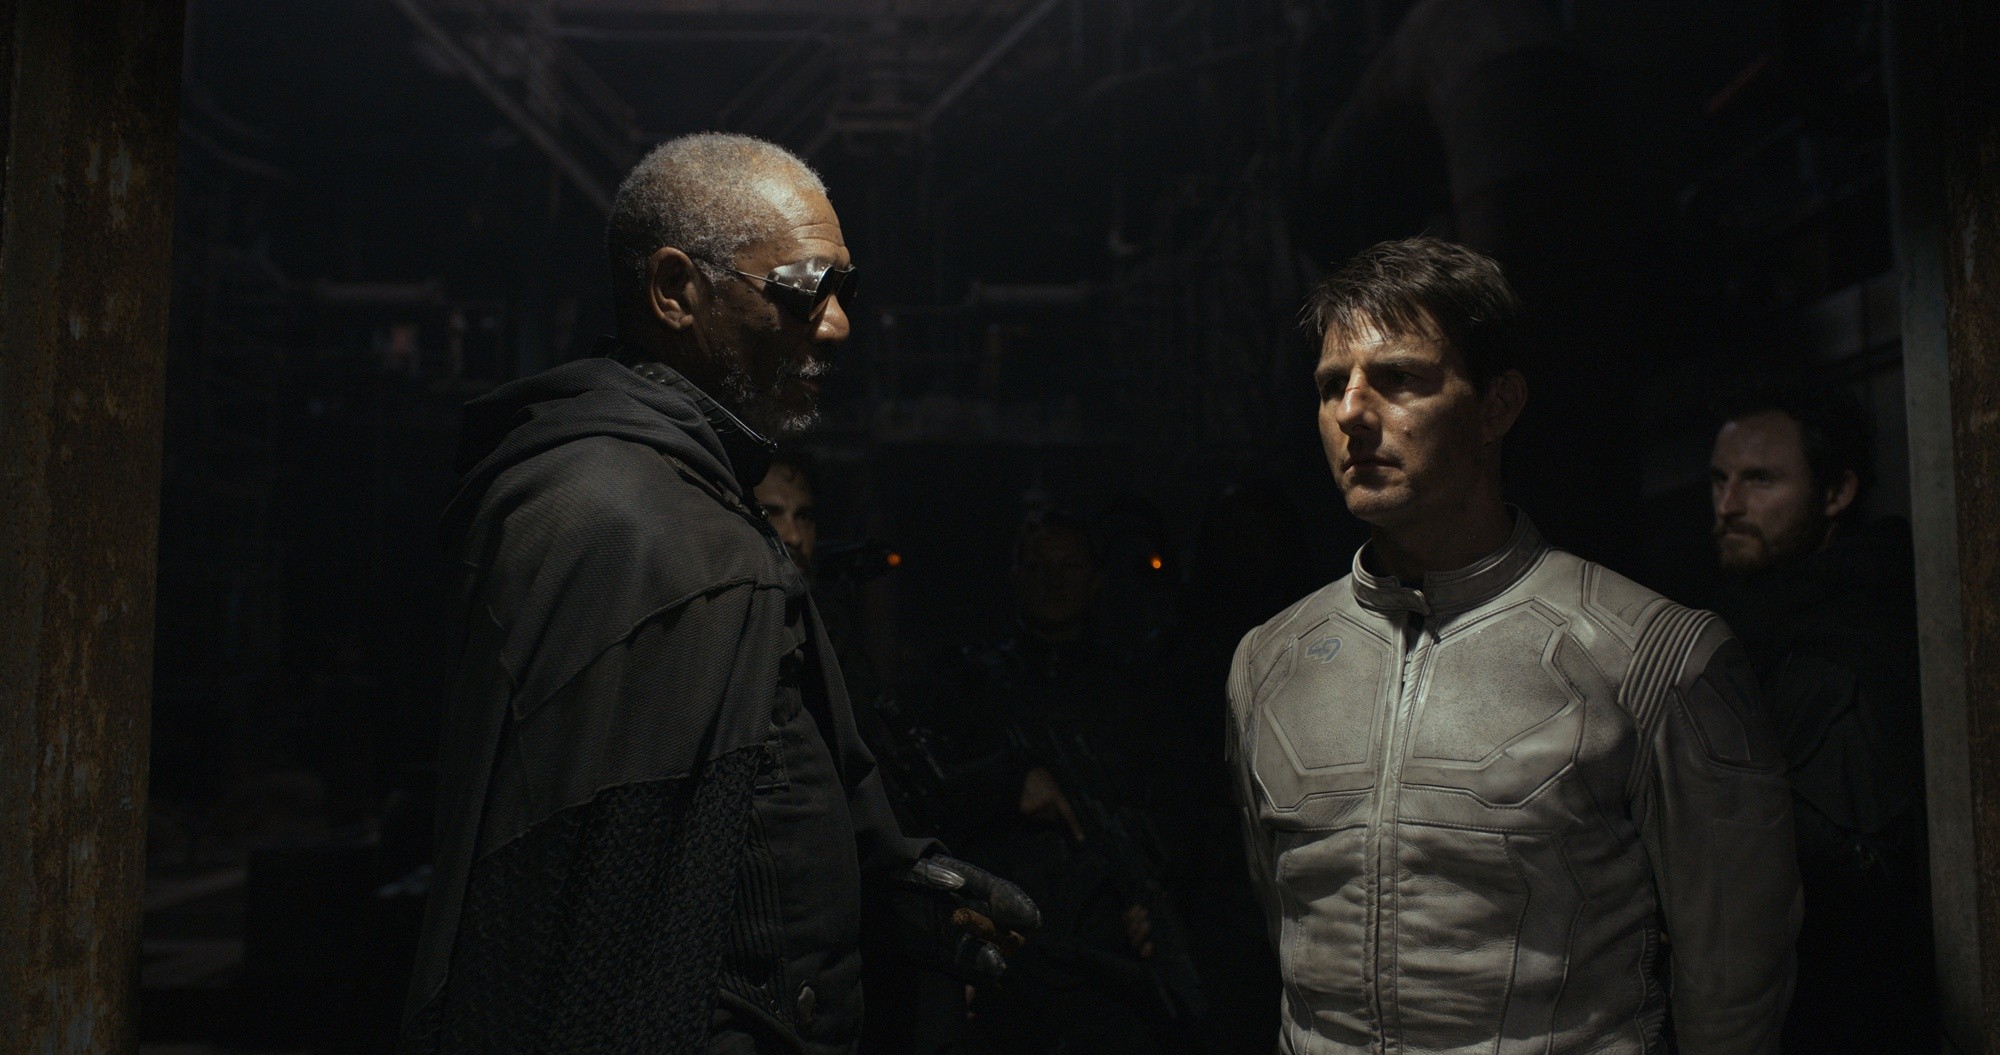 Morgan Freeman stars as Malcolm Beech and Tom Cruise stars as Jack Harper in Universal Pictures' Oblivion (2013)